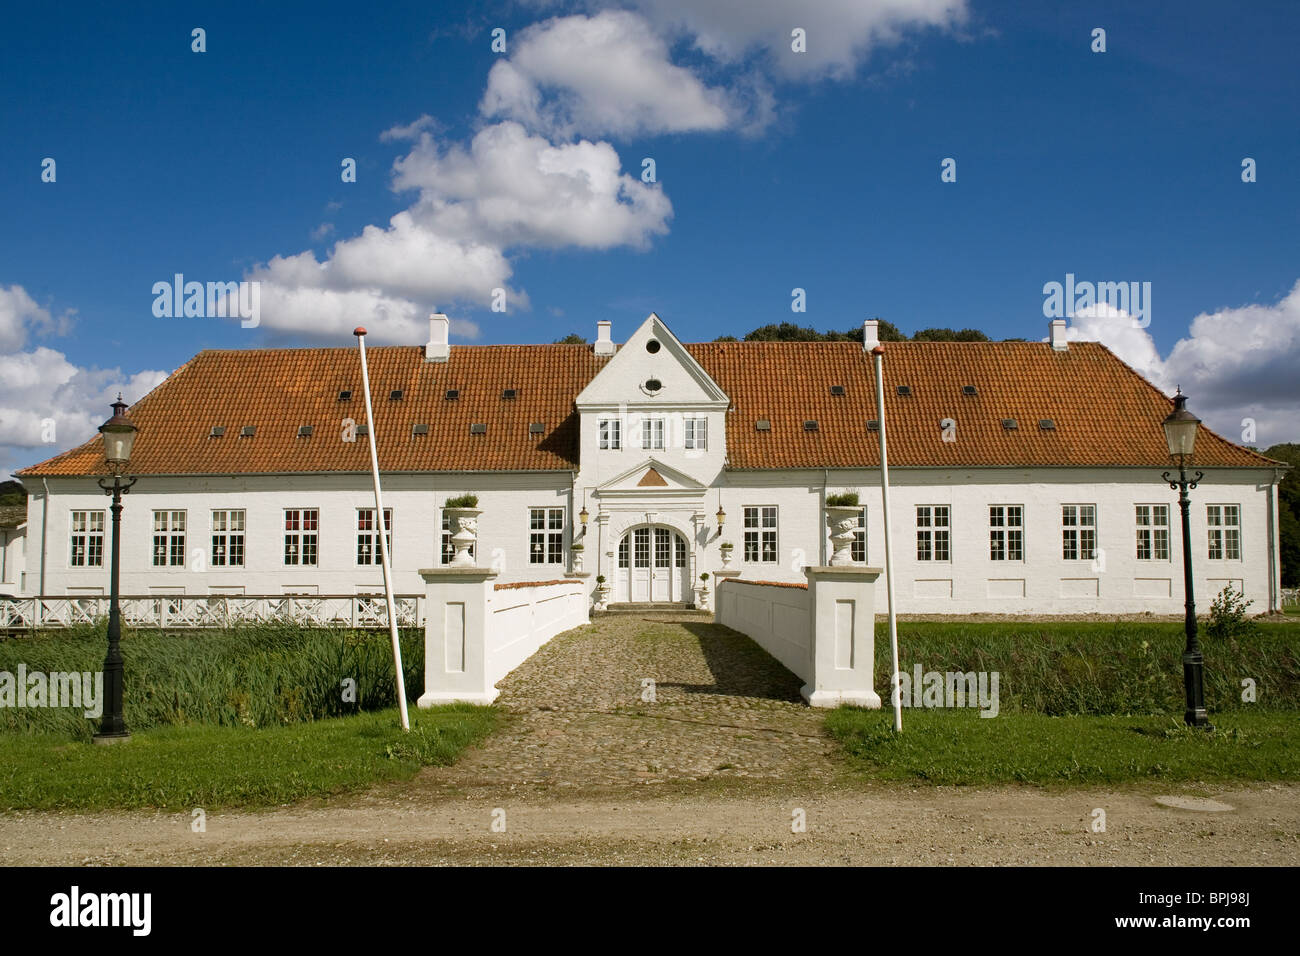 5 Denmark Aalborg Stock Photography and Images - Alamy